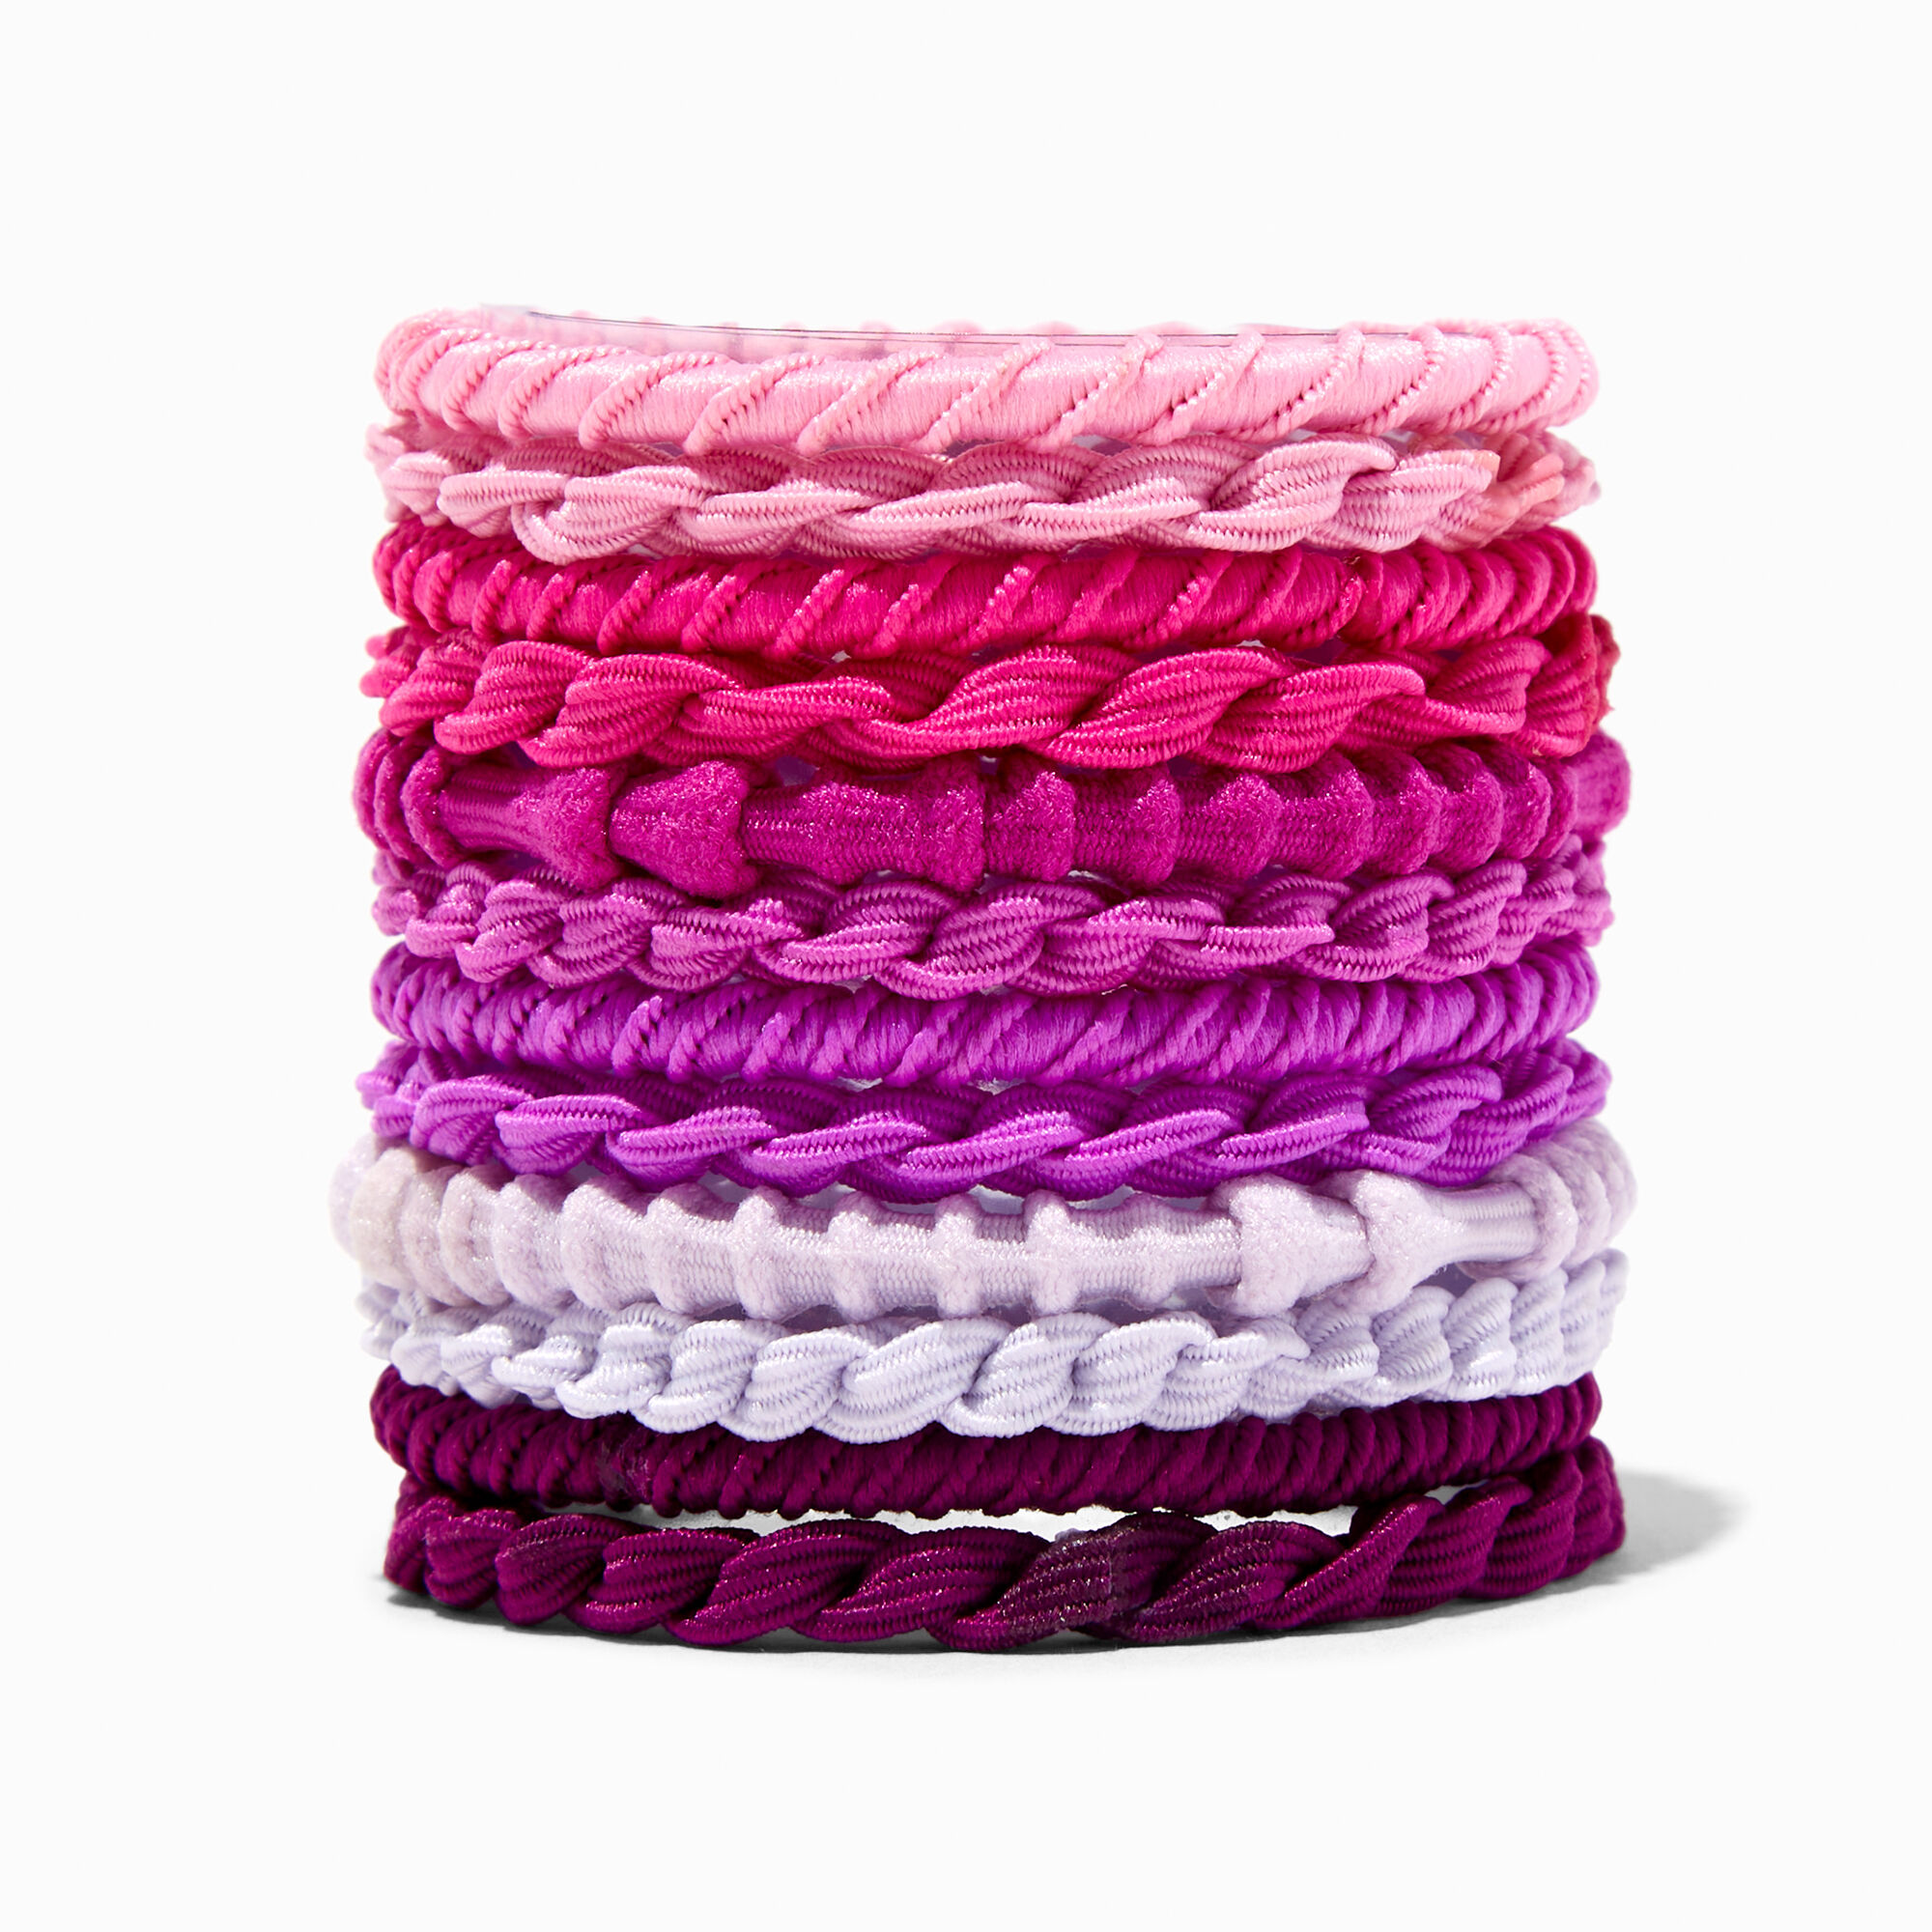 View Claires Purple Mixed Texture Hair Ties 12 Pack Pink information